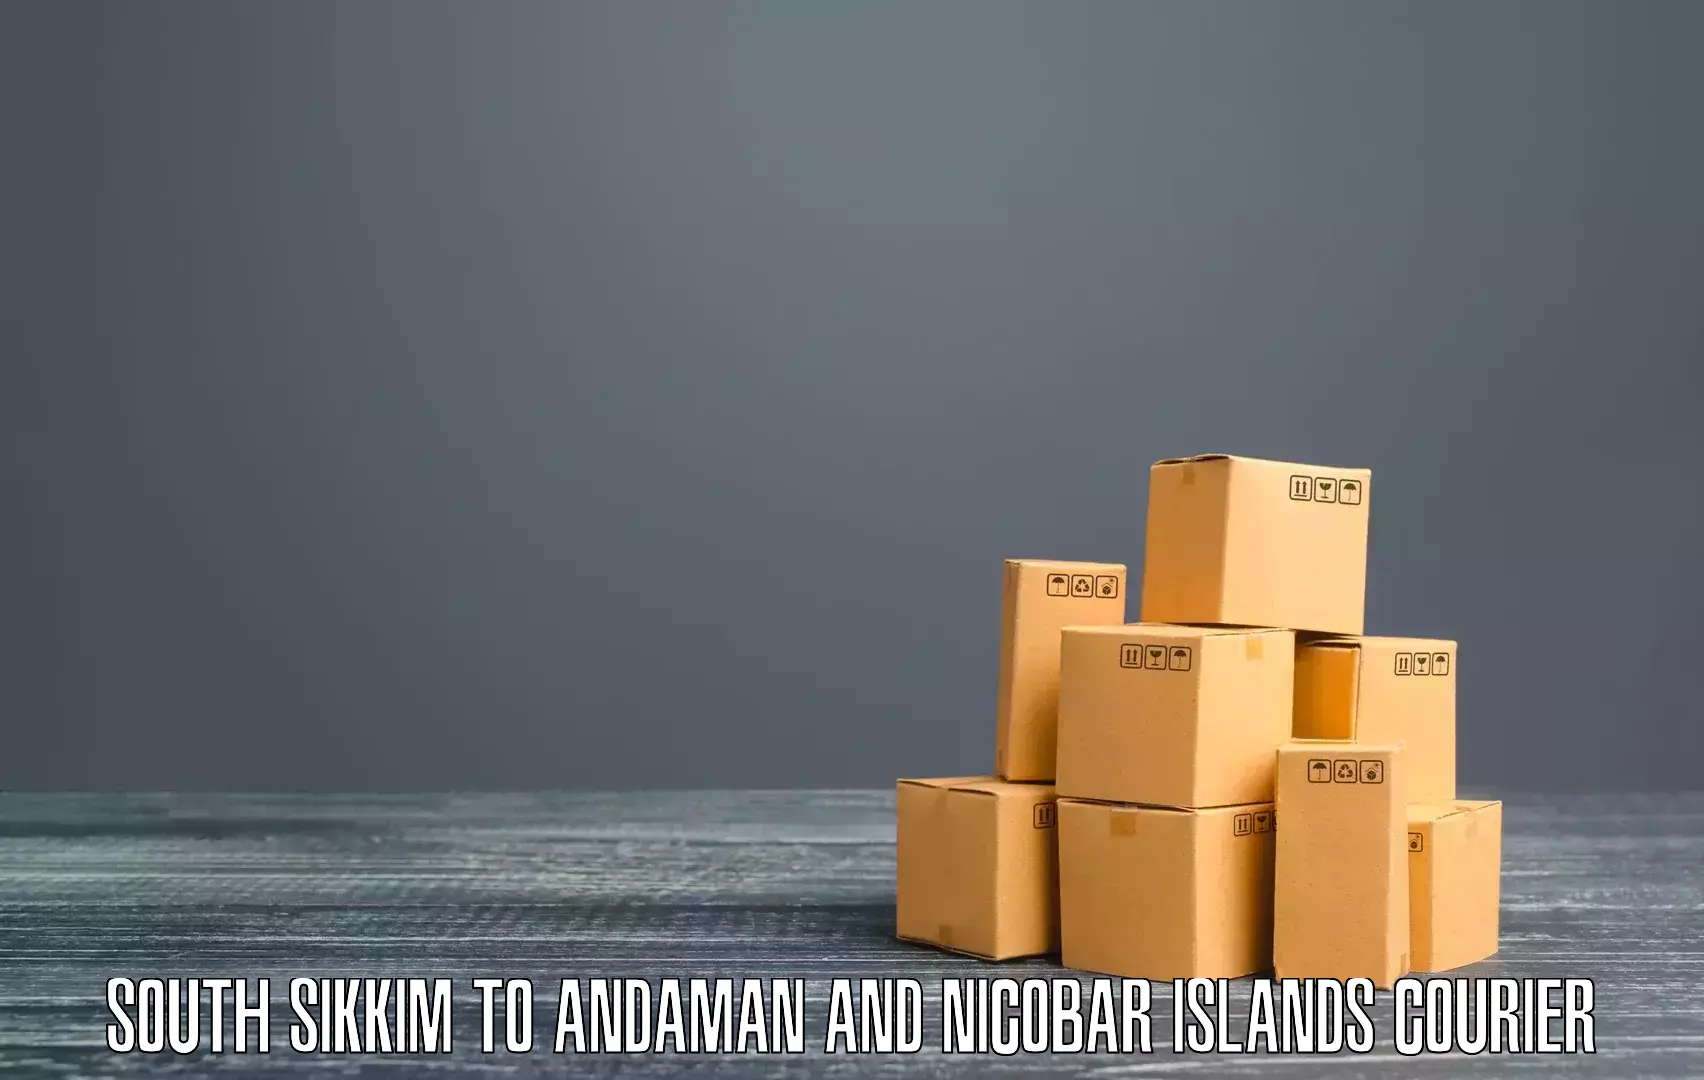 Nationwide shipping capabilities in South Sikkim to Andaman and Nicobar Islands